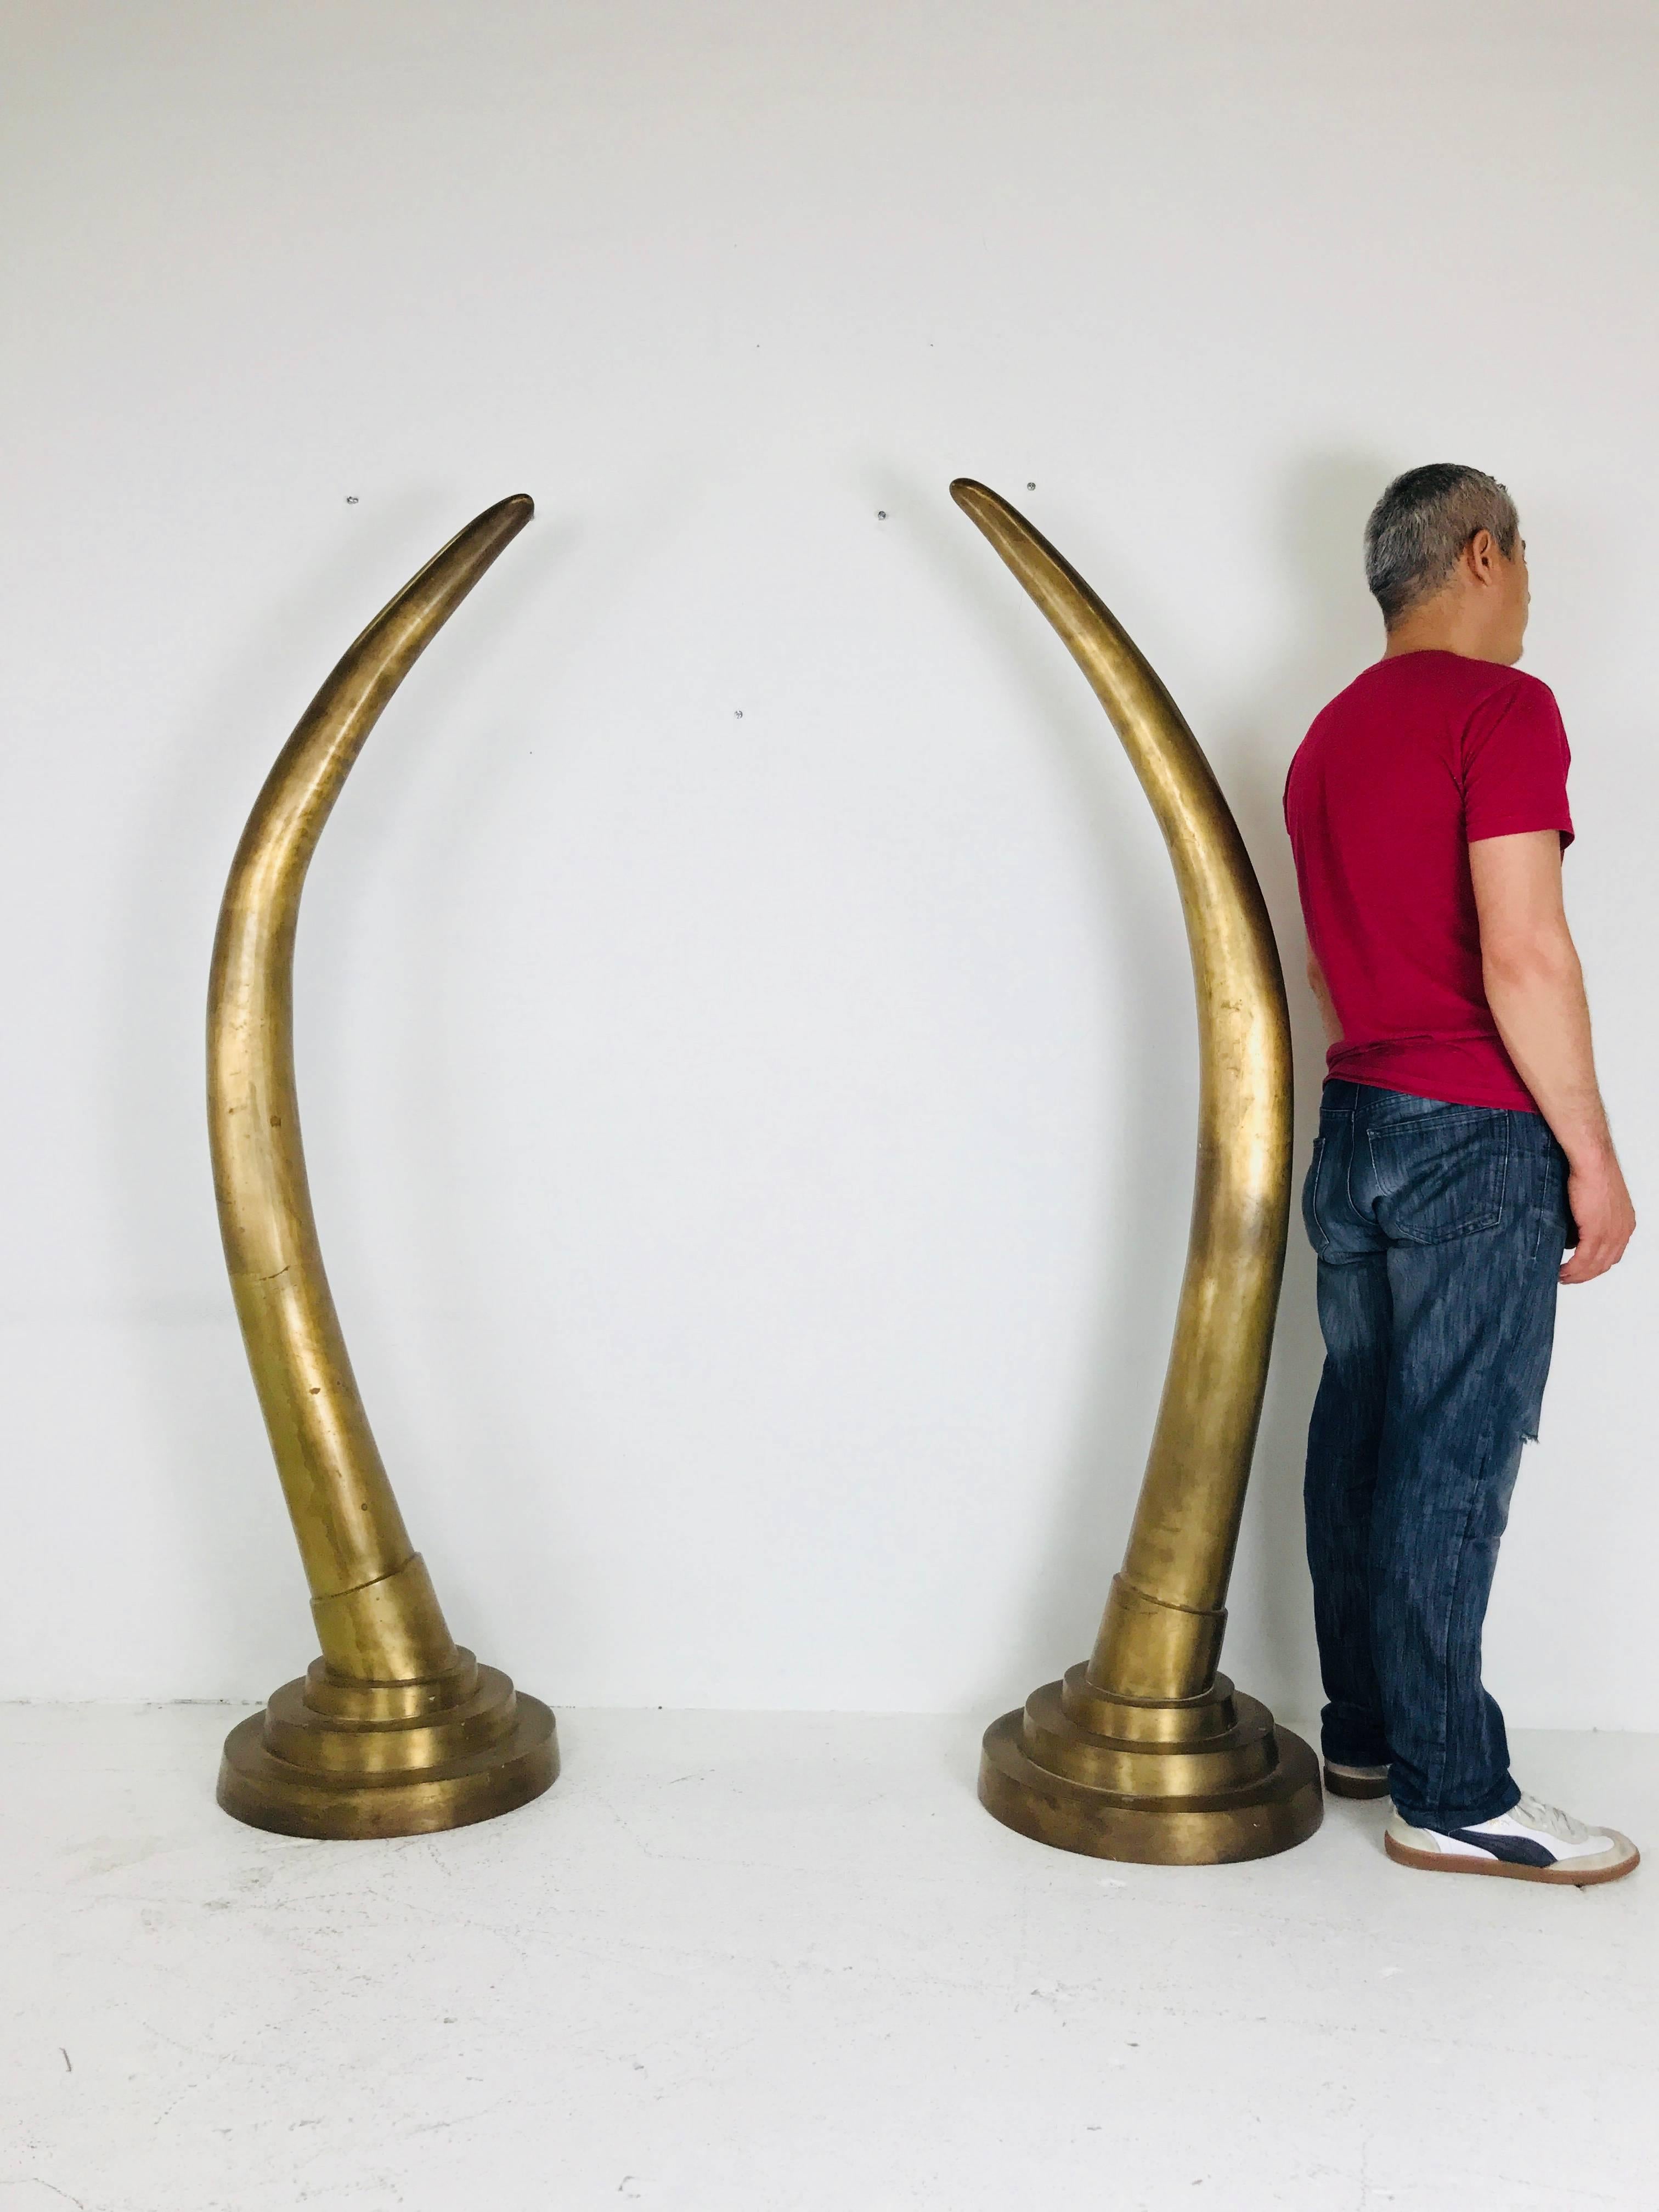 Pair of dramatic brass tusk statues. These brass tusk statues can drama to any room. The brass has an aged patina and has some minor dents in finish.

Dimensions: 16